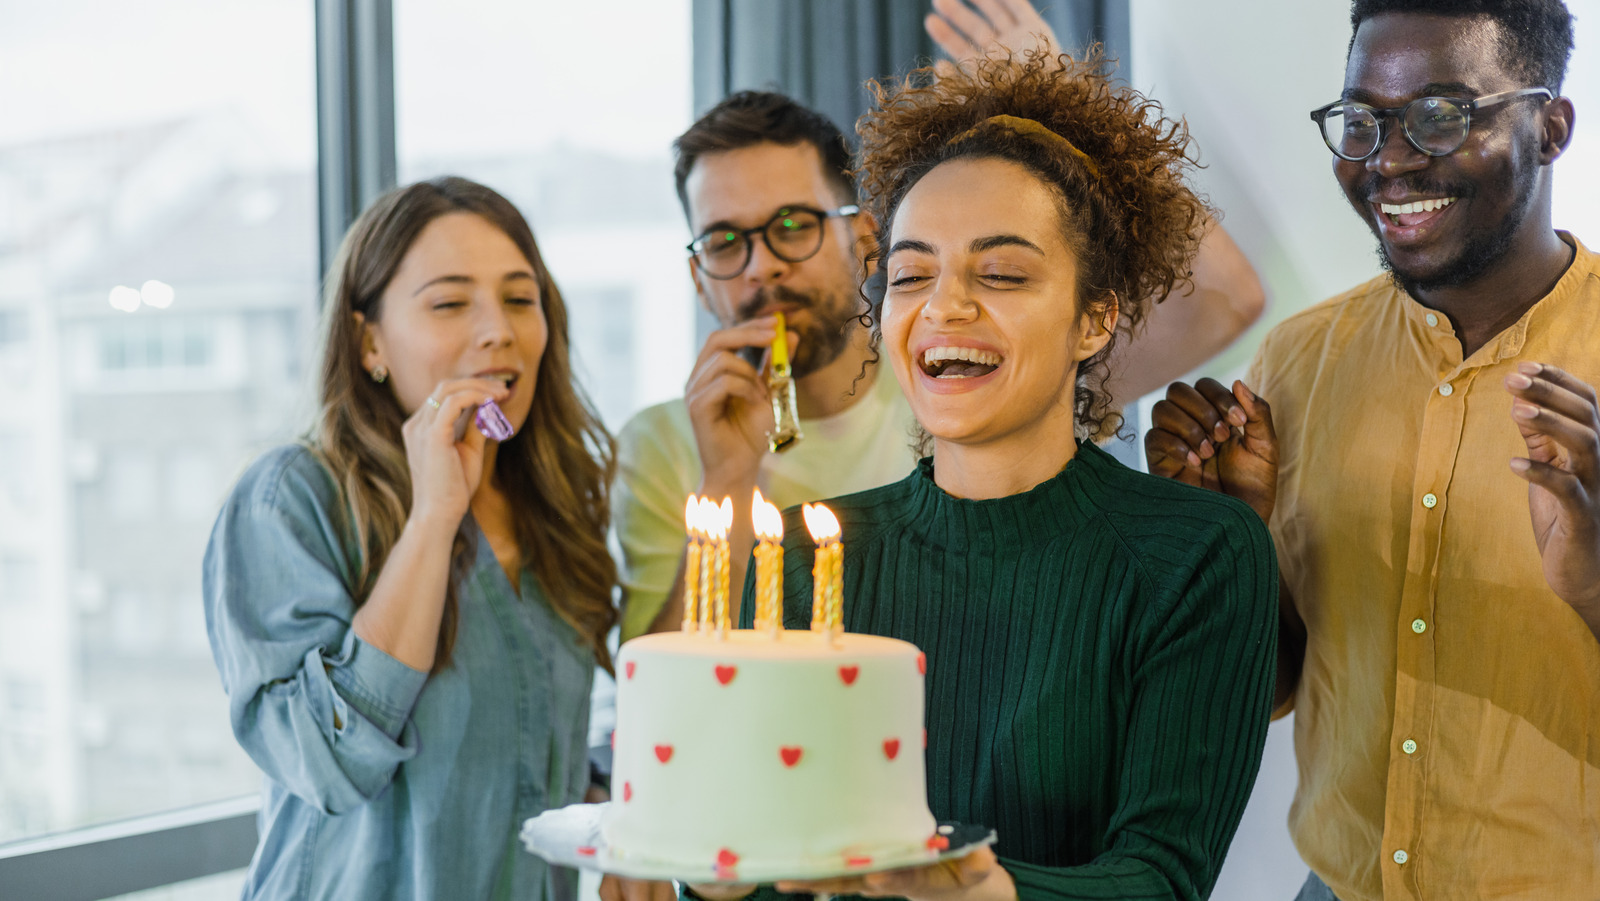 Why Not Celebrate Your Half-Birthday? Here Are Our Best Tips For A Fun Day